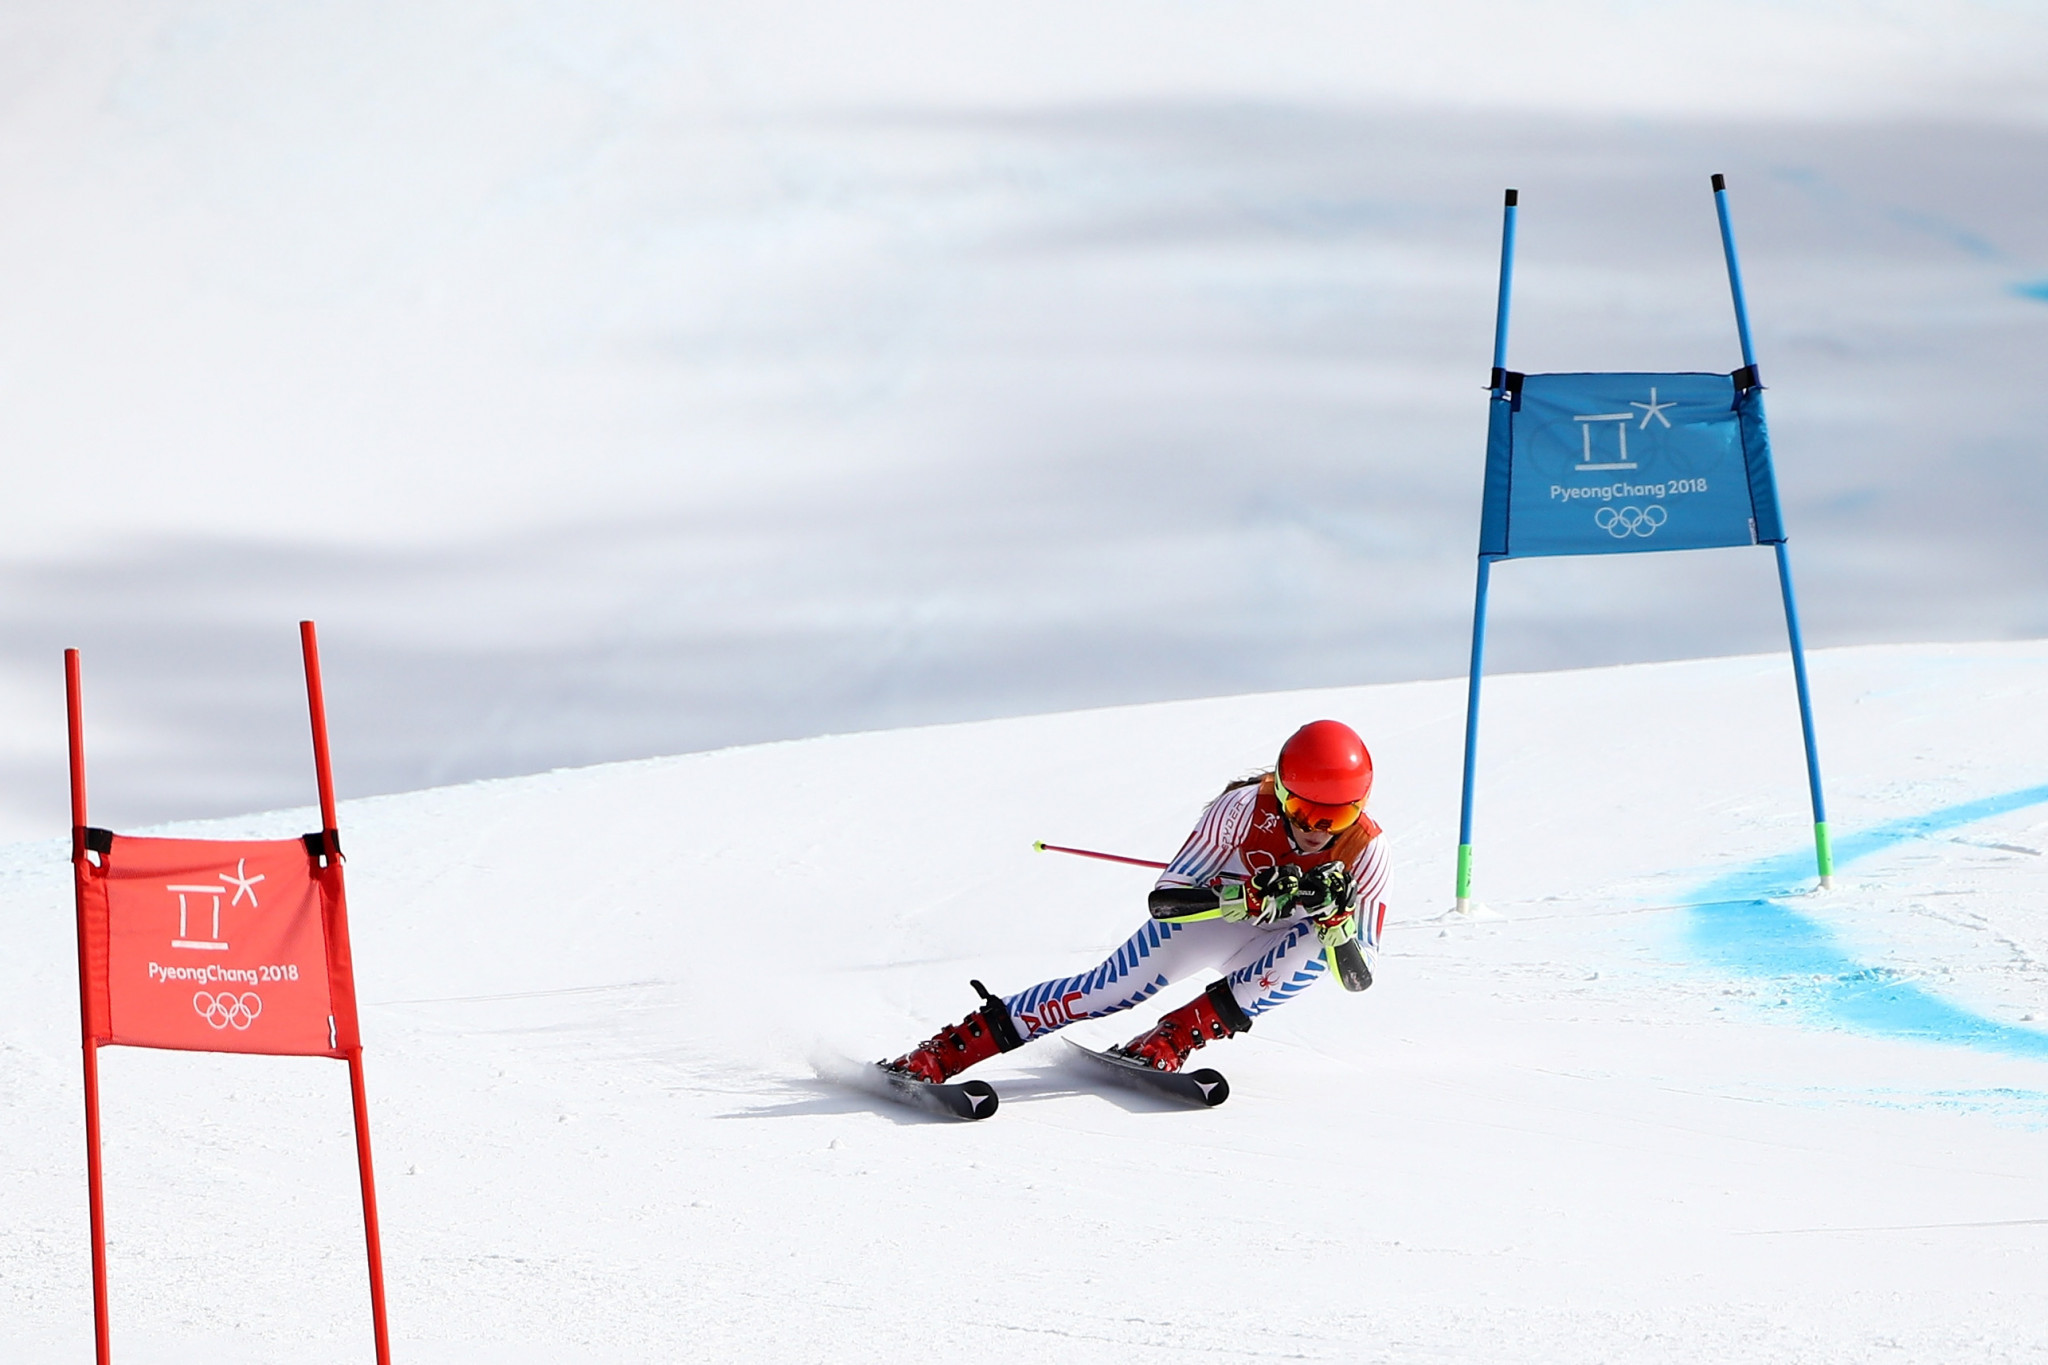 Mikaela Shiffrin of the United States triumphed in the women's giant slalom ©Getty Images